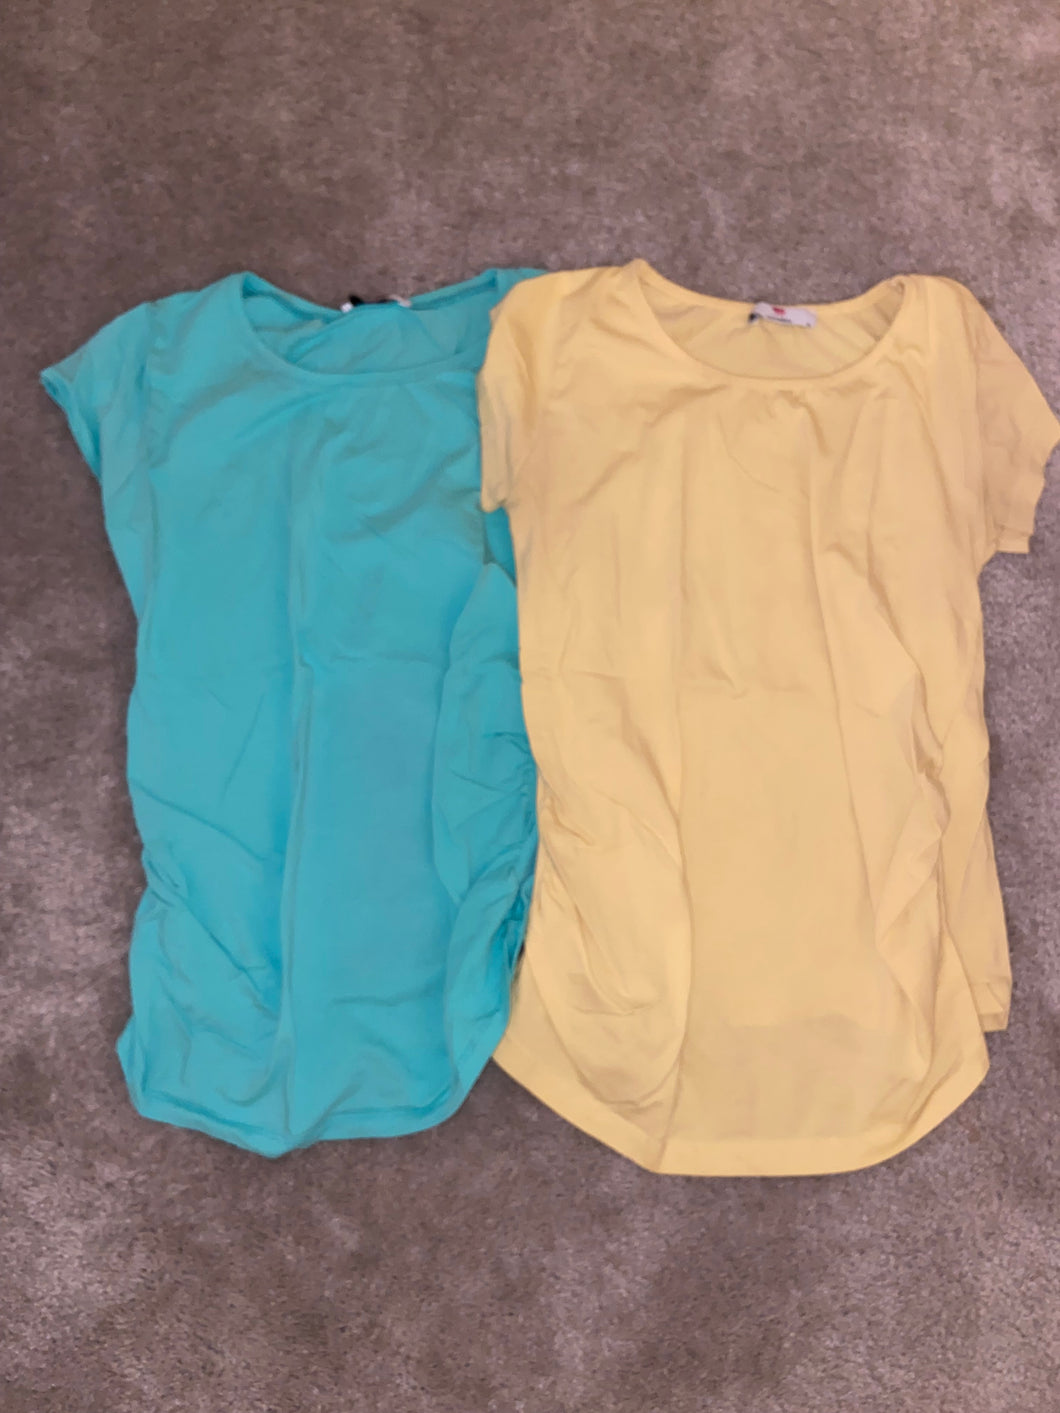 Women's lot of 2 maternity shirts, Luvmabelly, small  Women's Small